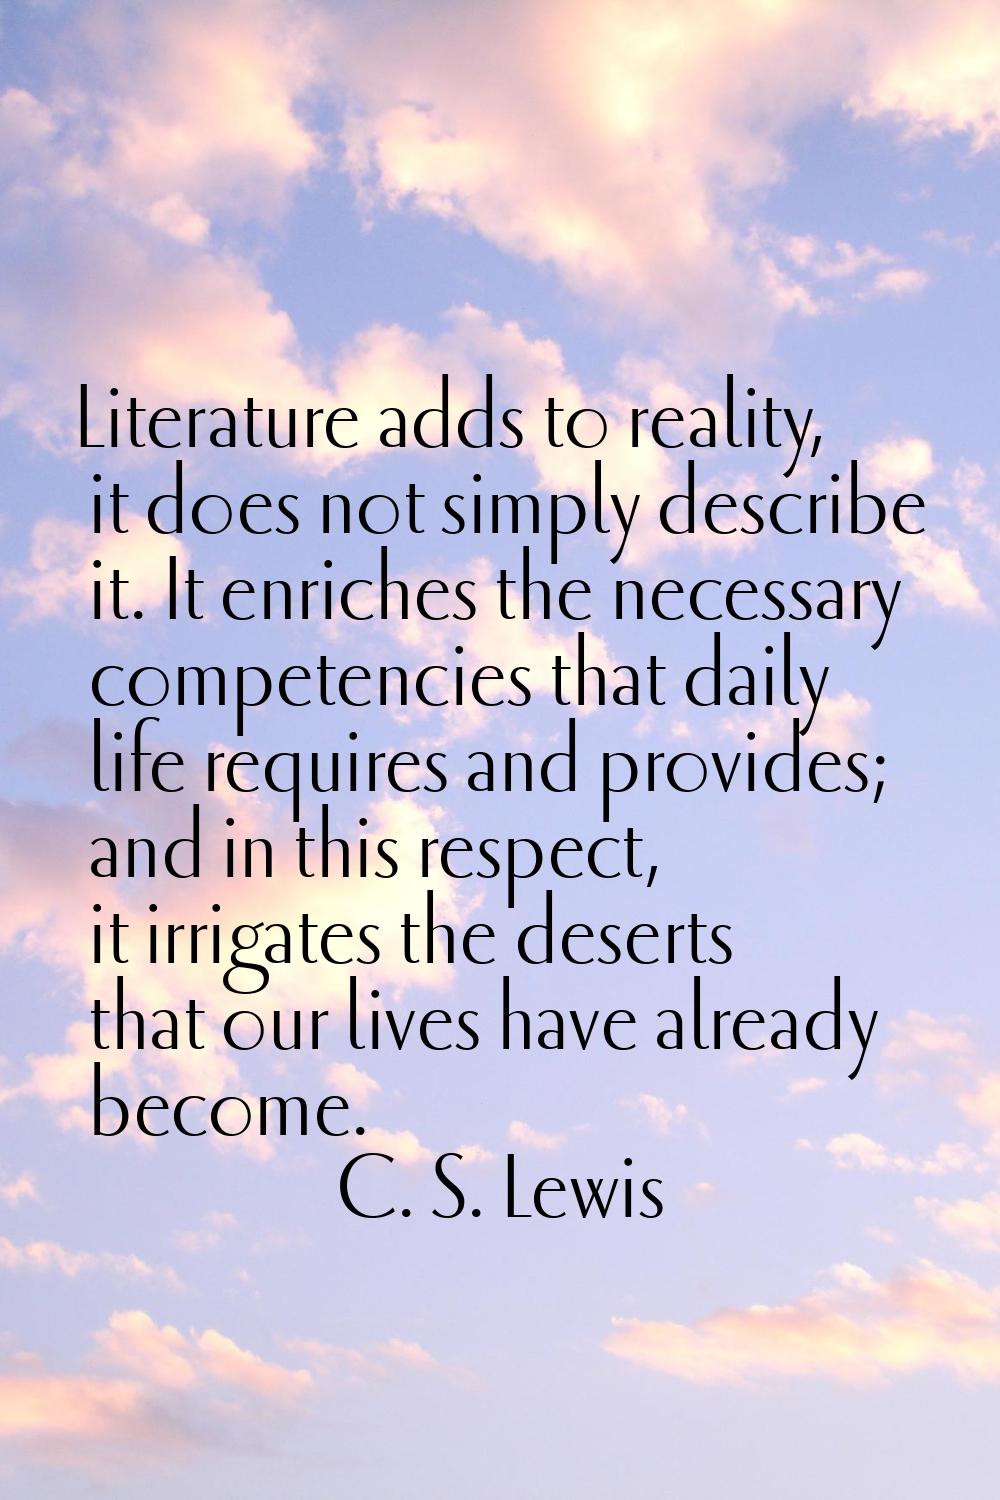 Literature adds to reality, it does not simply describe it. It enriches the necessary competencies 